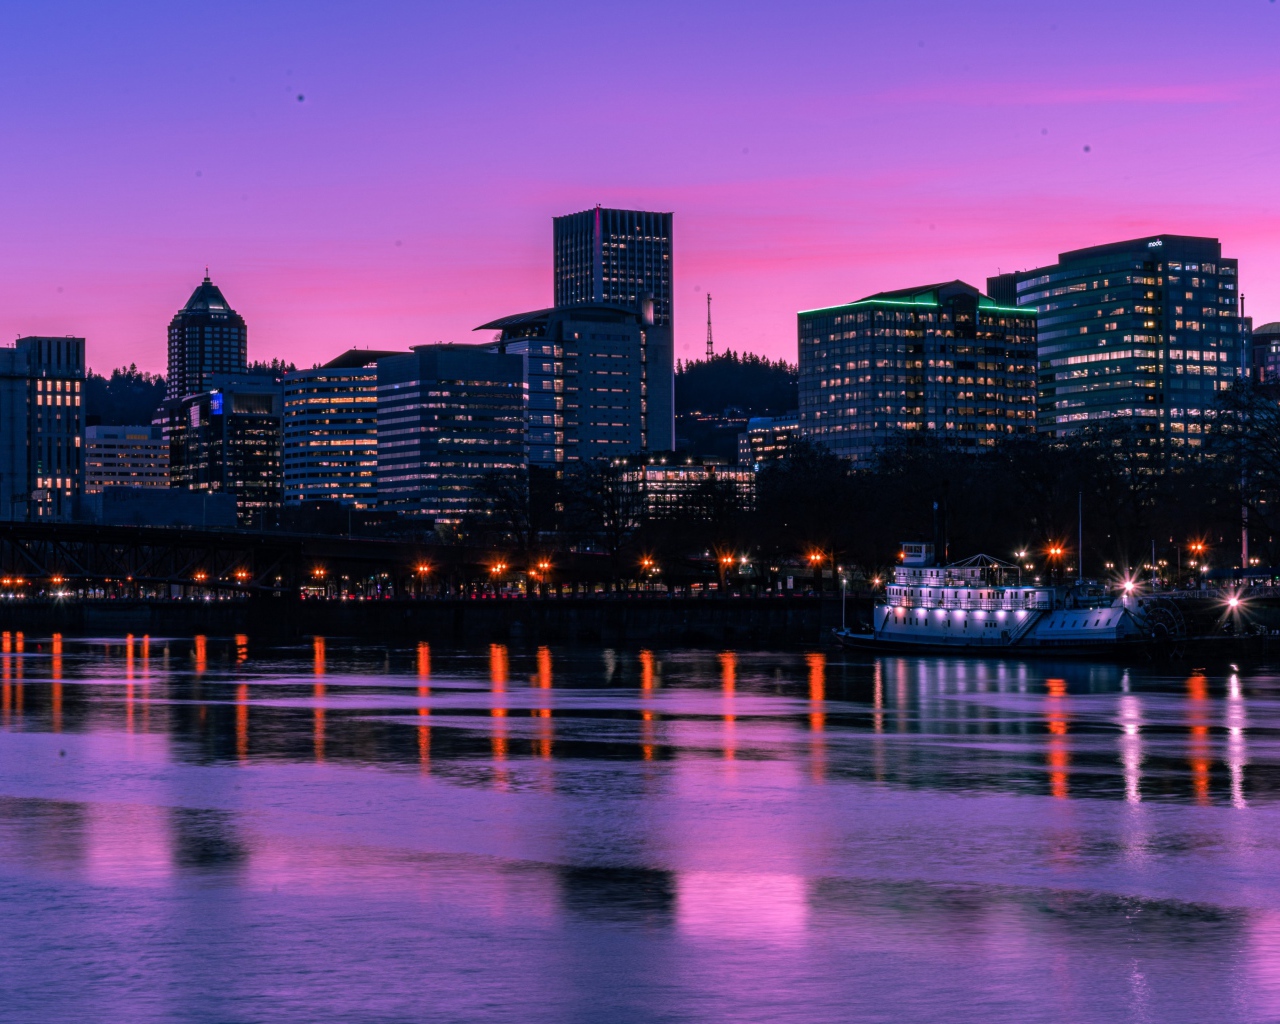 Lilac sunset over the night city by the river